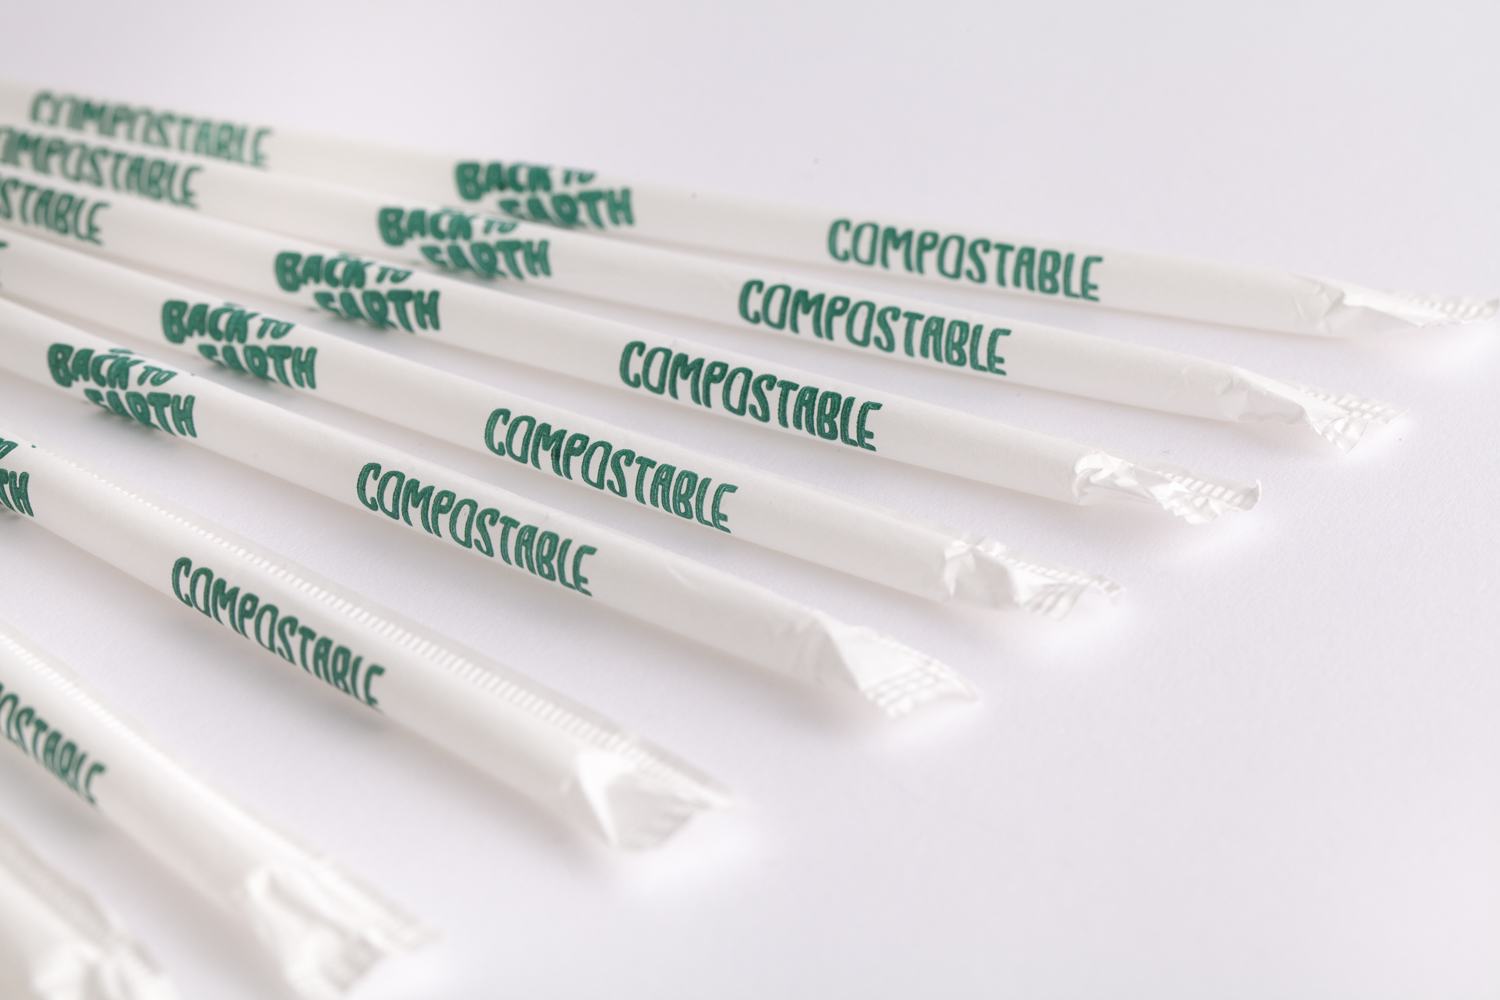 close up line of straws with white paper covers that say "Back to Earth" as well as "compostable" on them